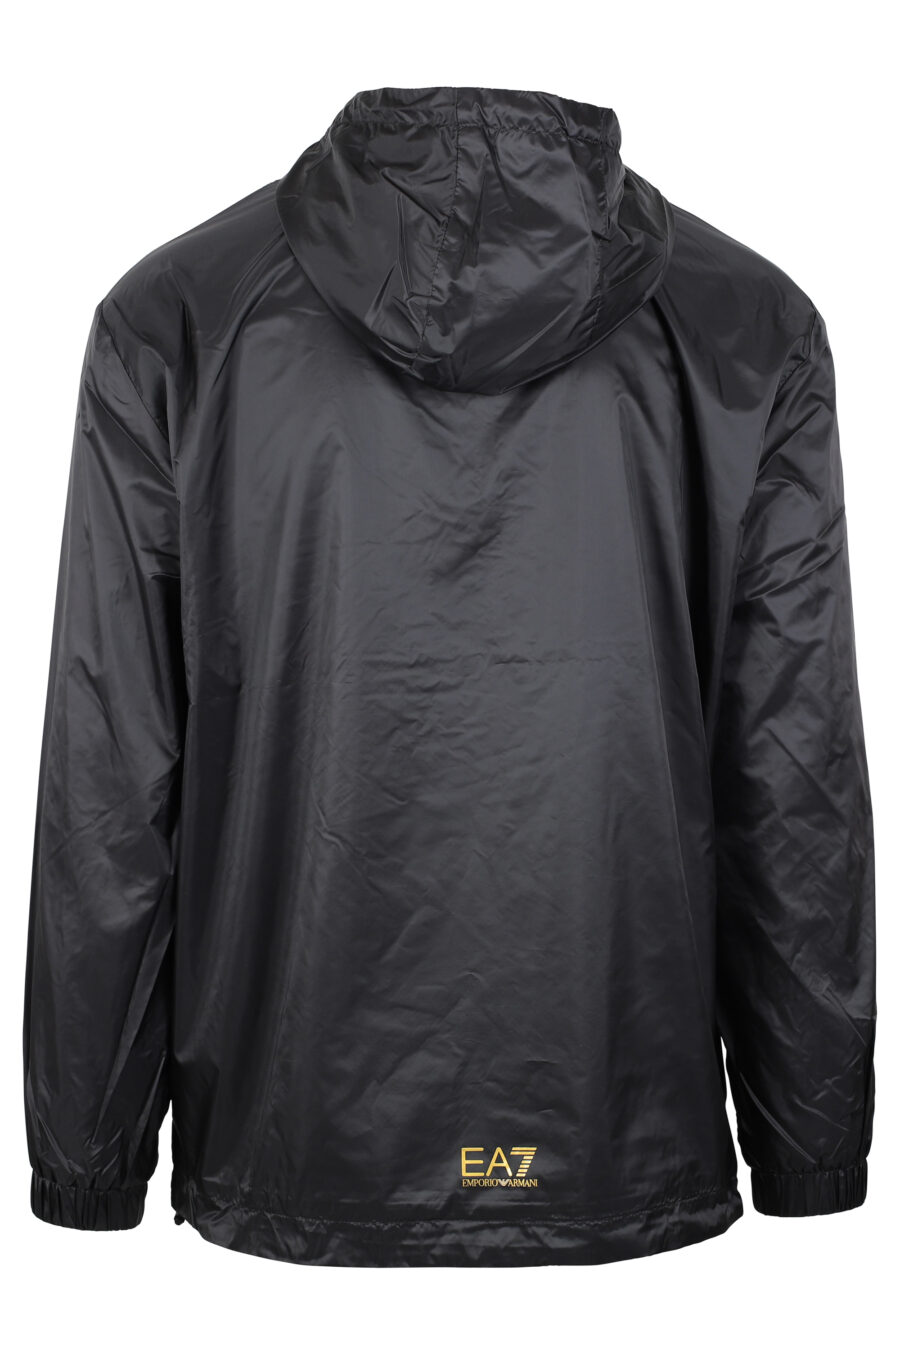 Black waterproof jacket with hood and logo mix vertical - IMG 4662